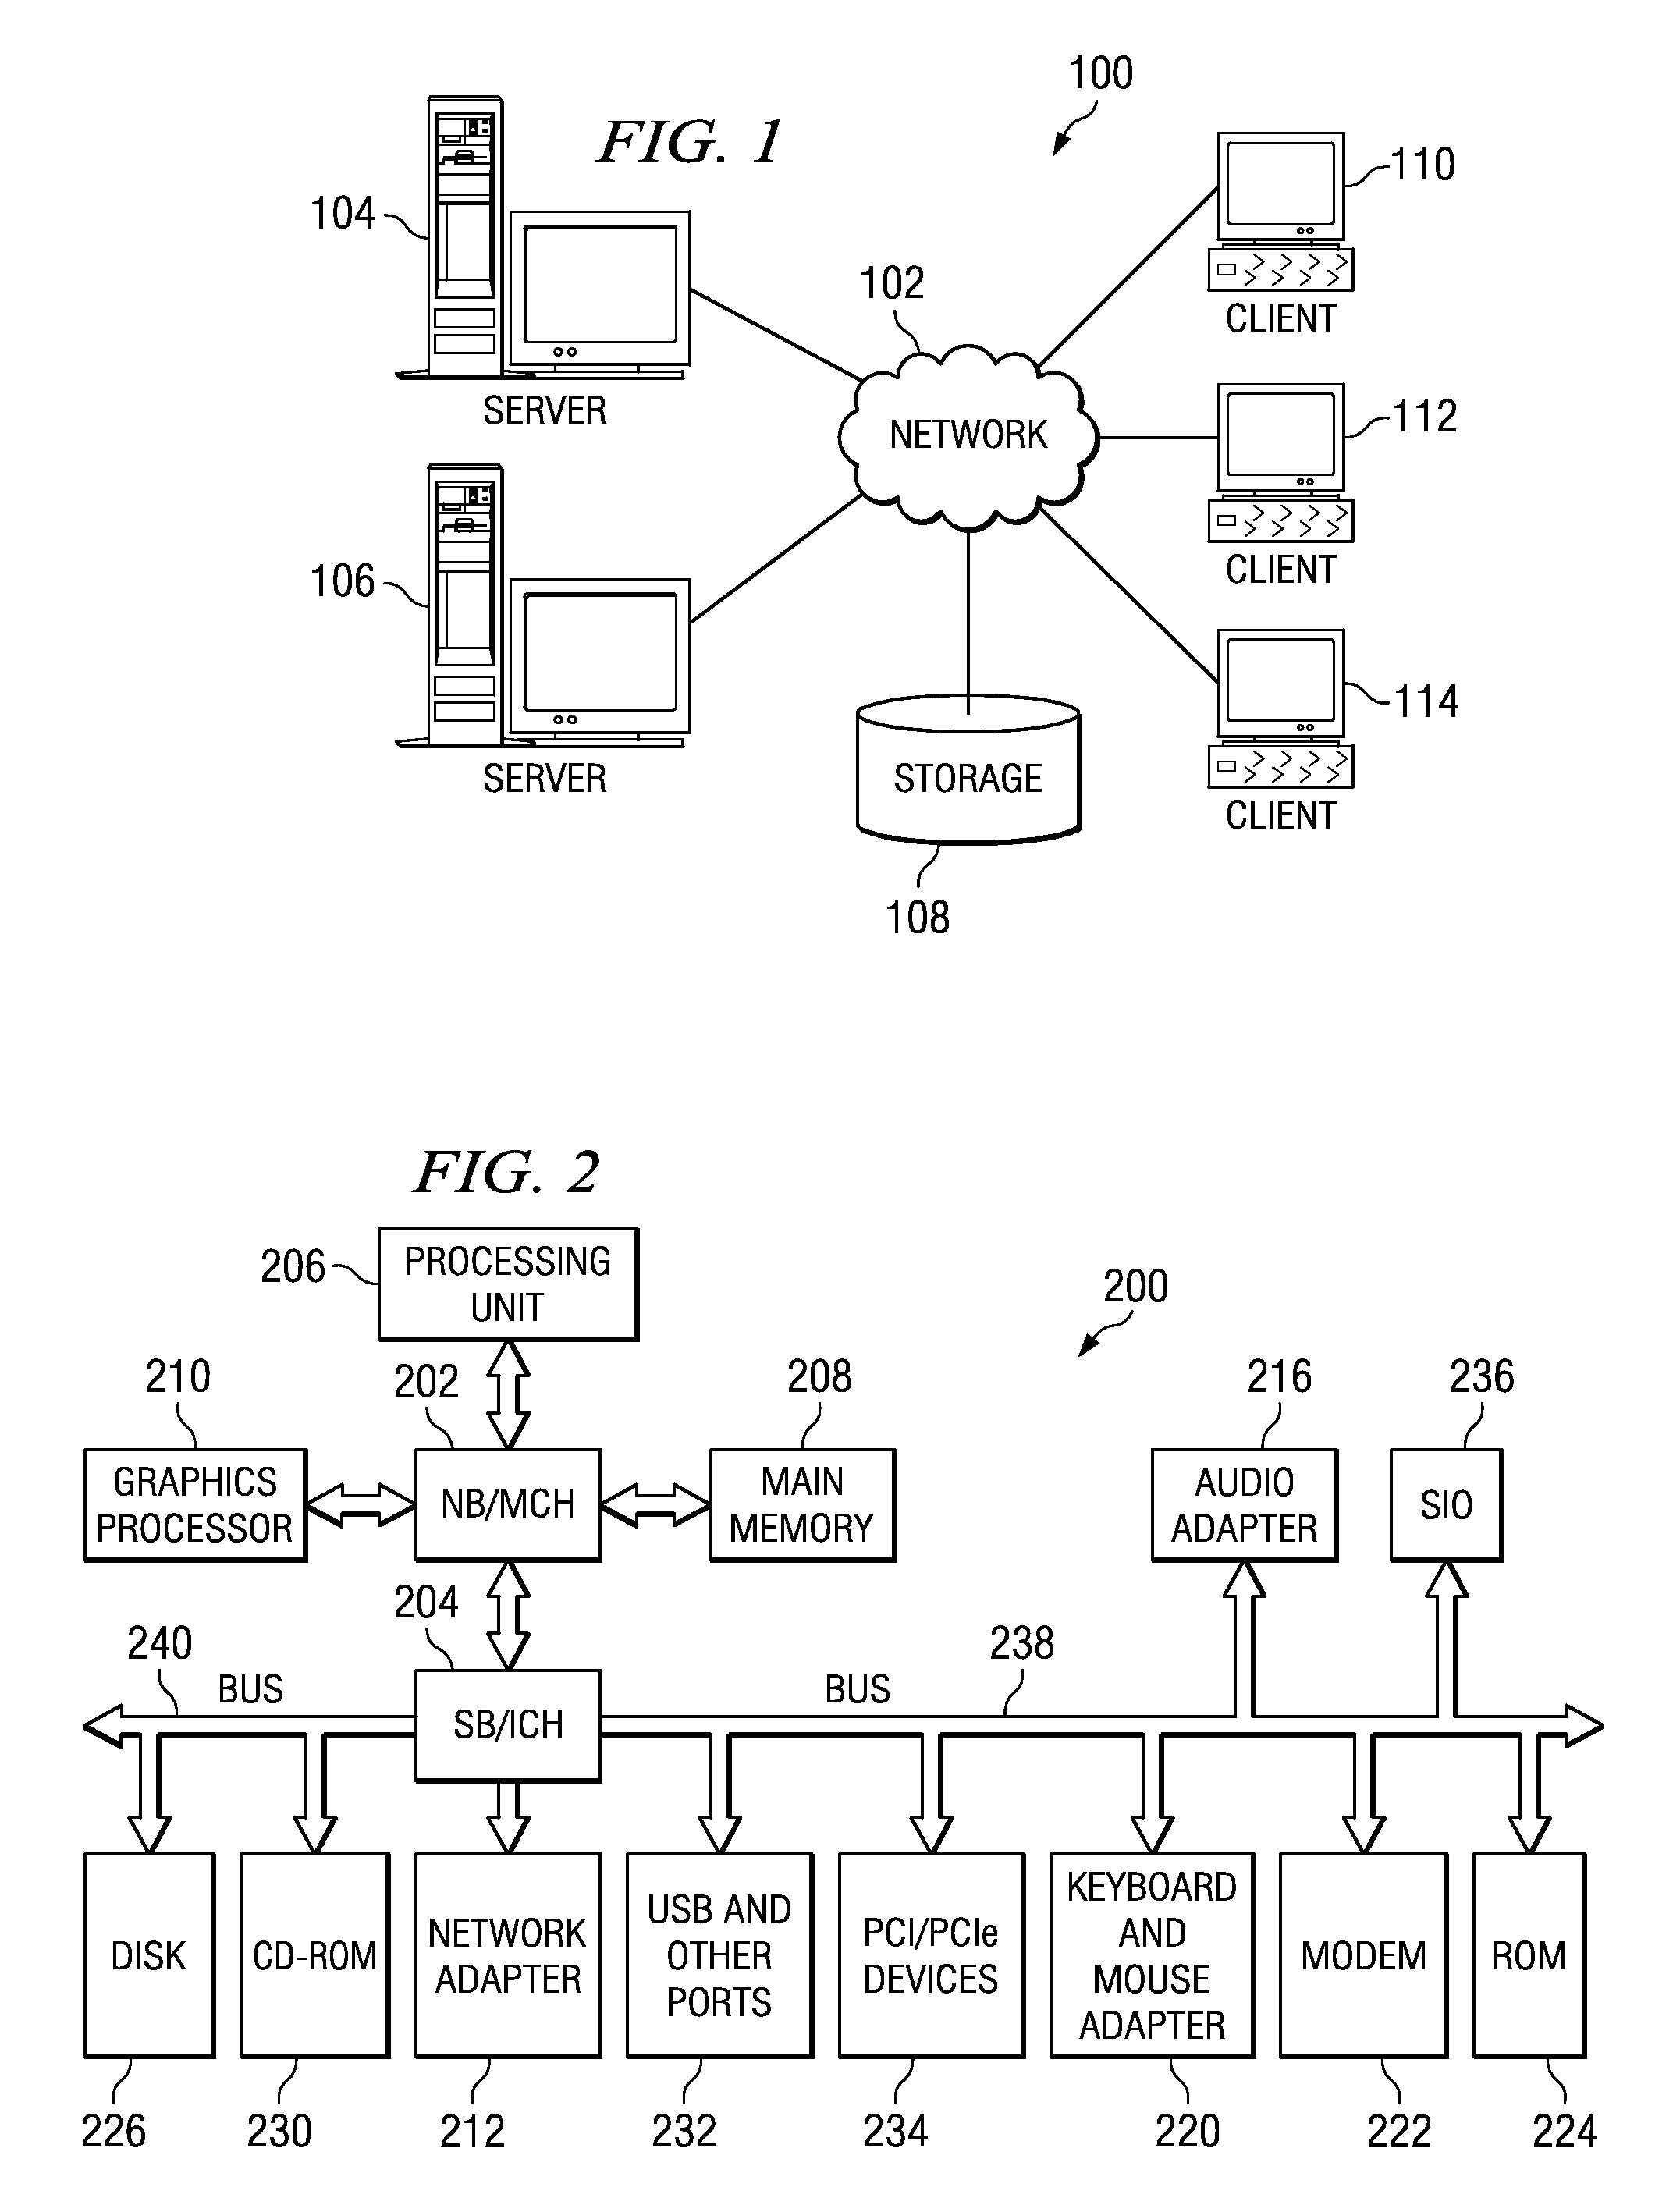 Method and Apparatus for Self-Healing Symmetric Multi-Processor System Interconnects